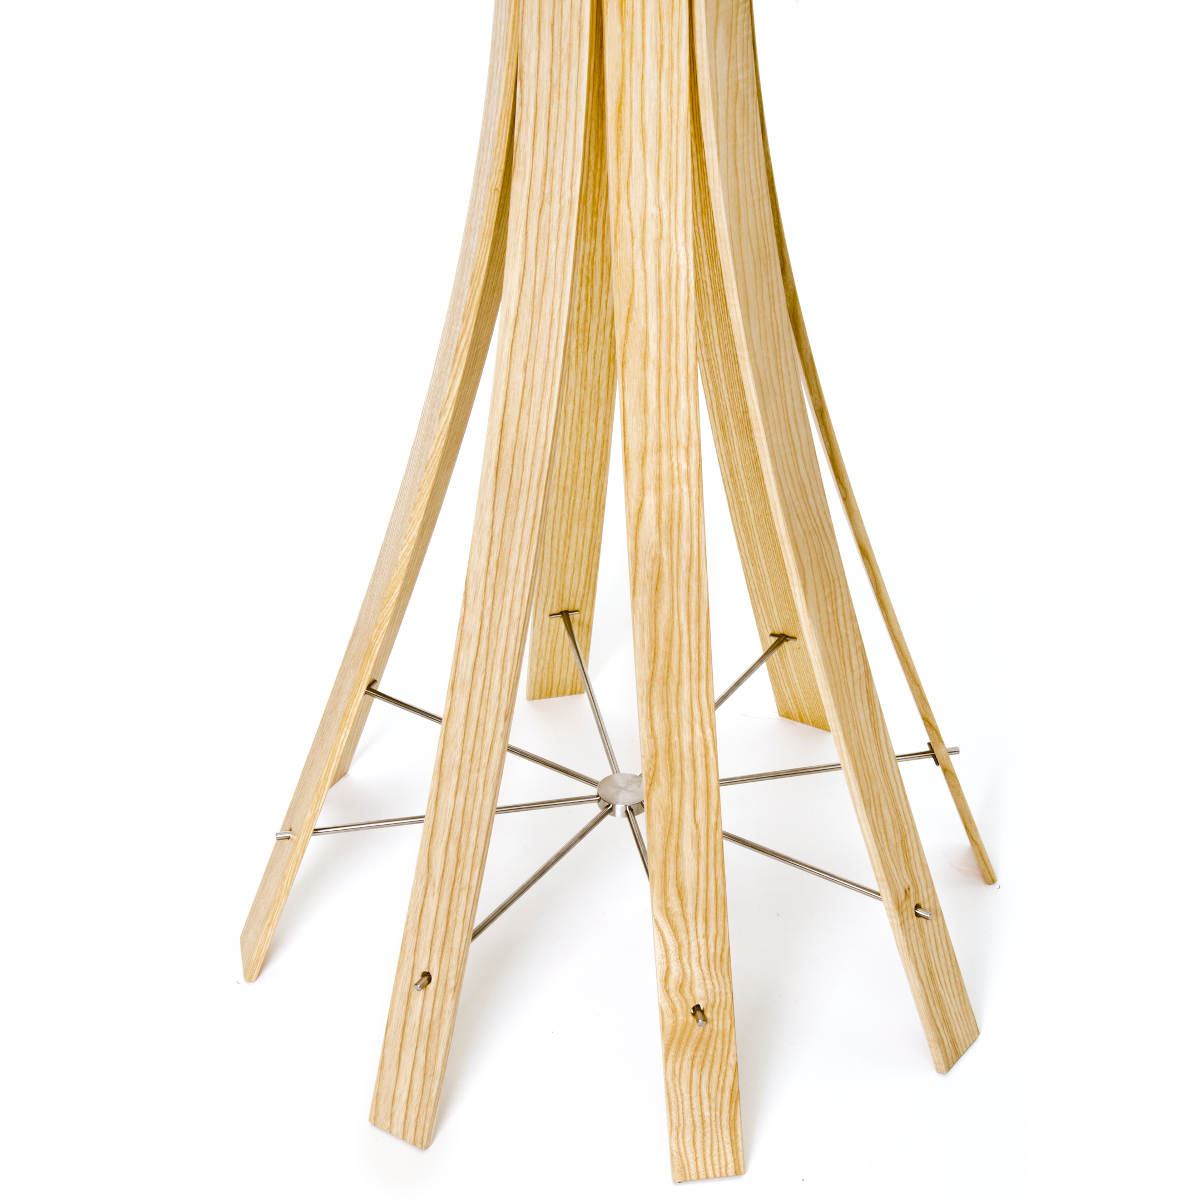 Large version: clothes rack made of solid wood